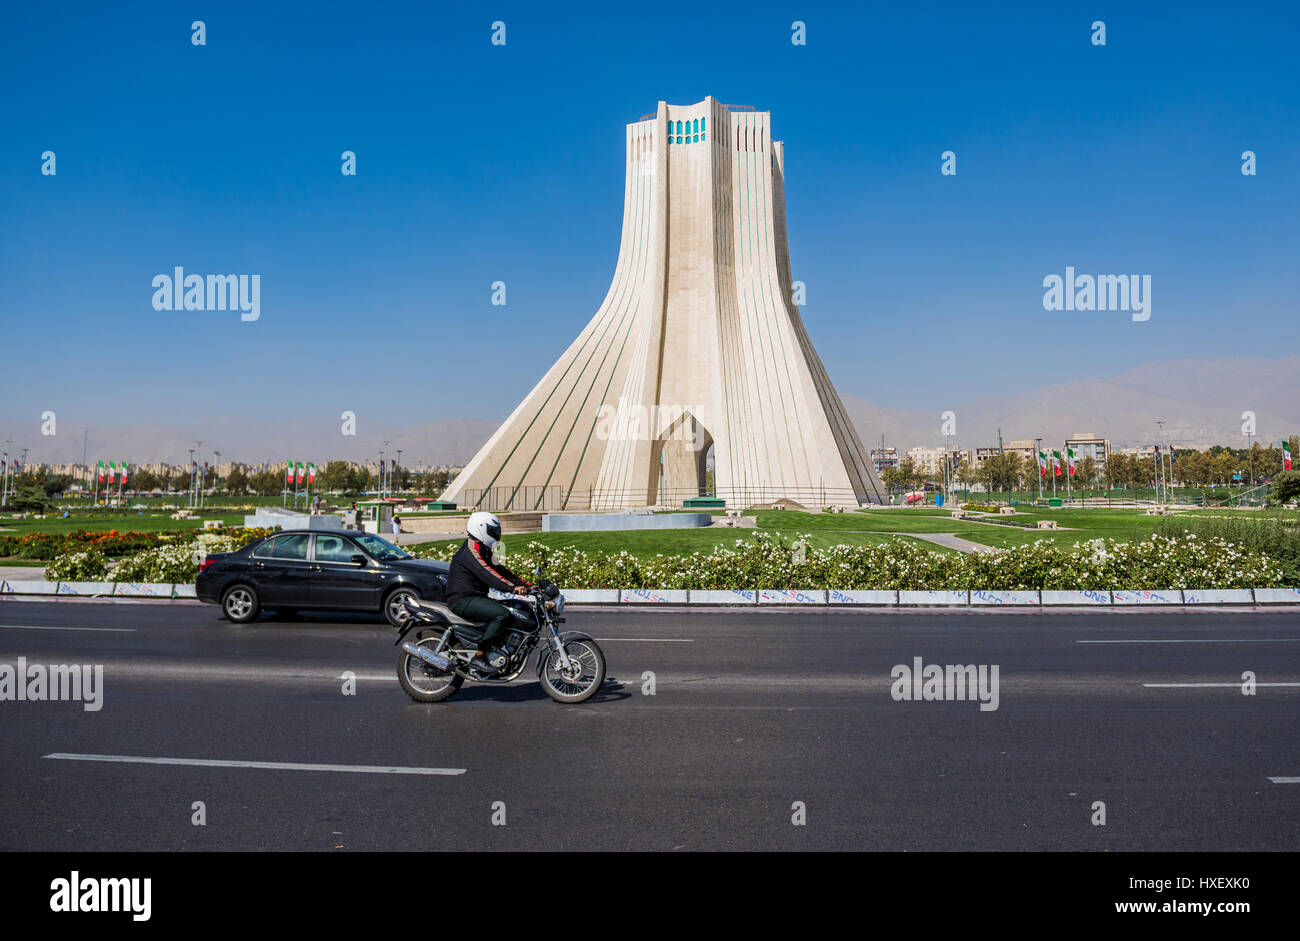 Azadi Tower, formerly known as the Shahyad Tower, located at Azadi Square in Tehran city, capital of Iran and Tehran Province Stock Photo